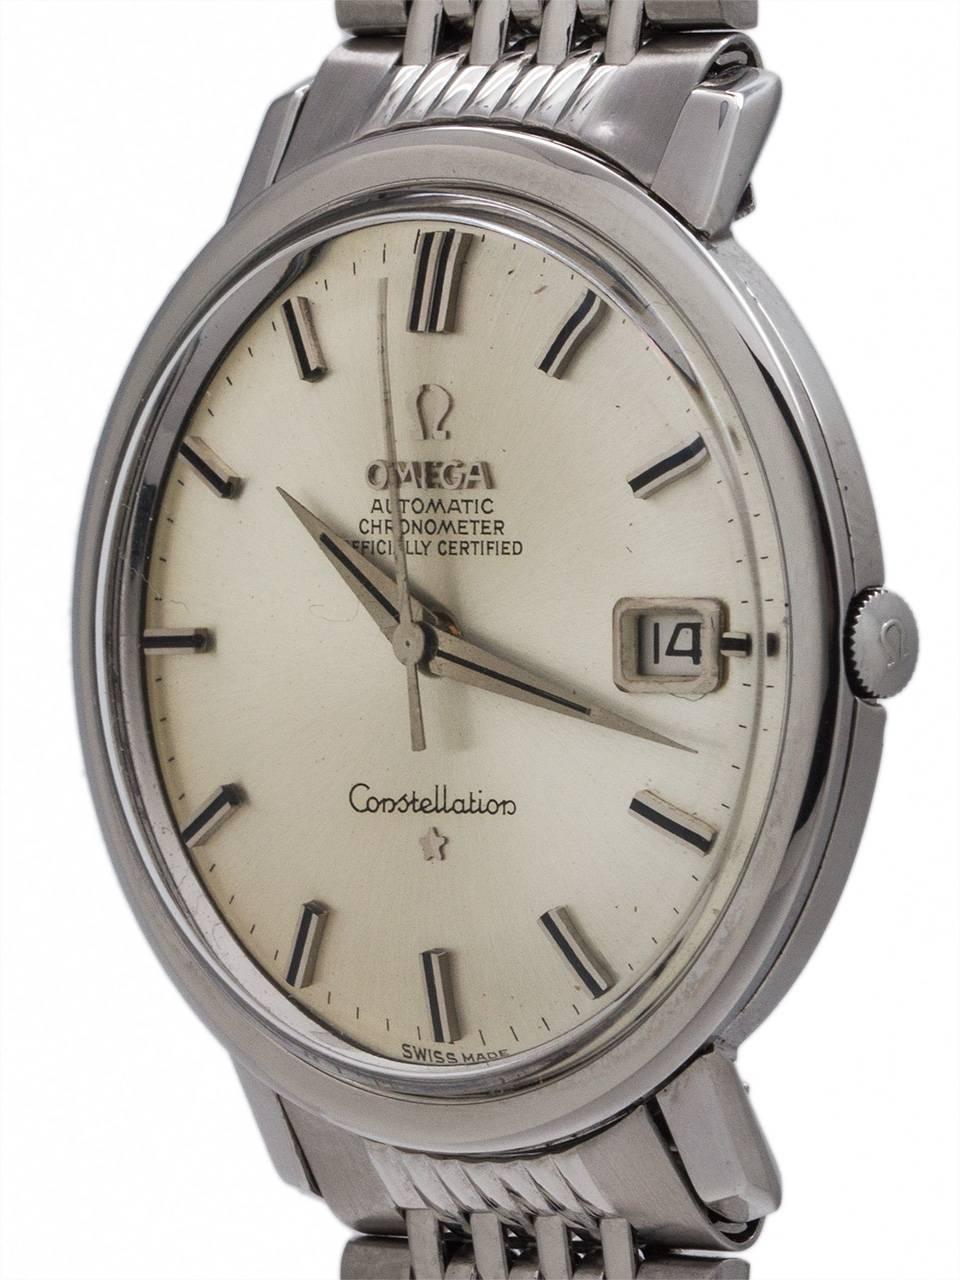 Omega Constellation Stainless Steel ref# 168.004 movement serial# 20.9 million circa 1963. Featuring 36 x 40mm case with screw down case back and deeply engraved Observatory logo, with acrylic crystal, and beautiful condition original 2 tone